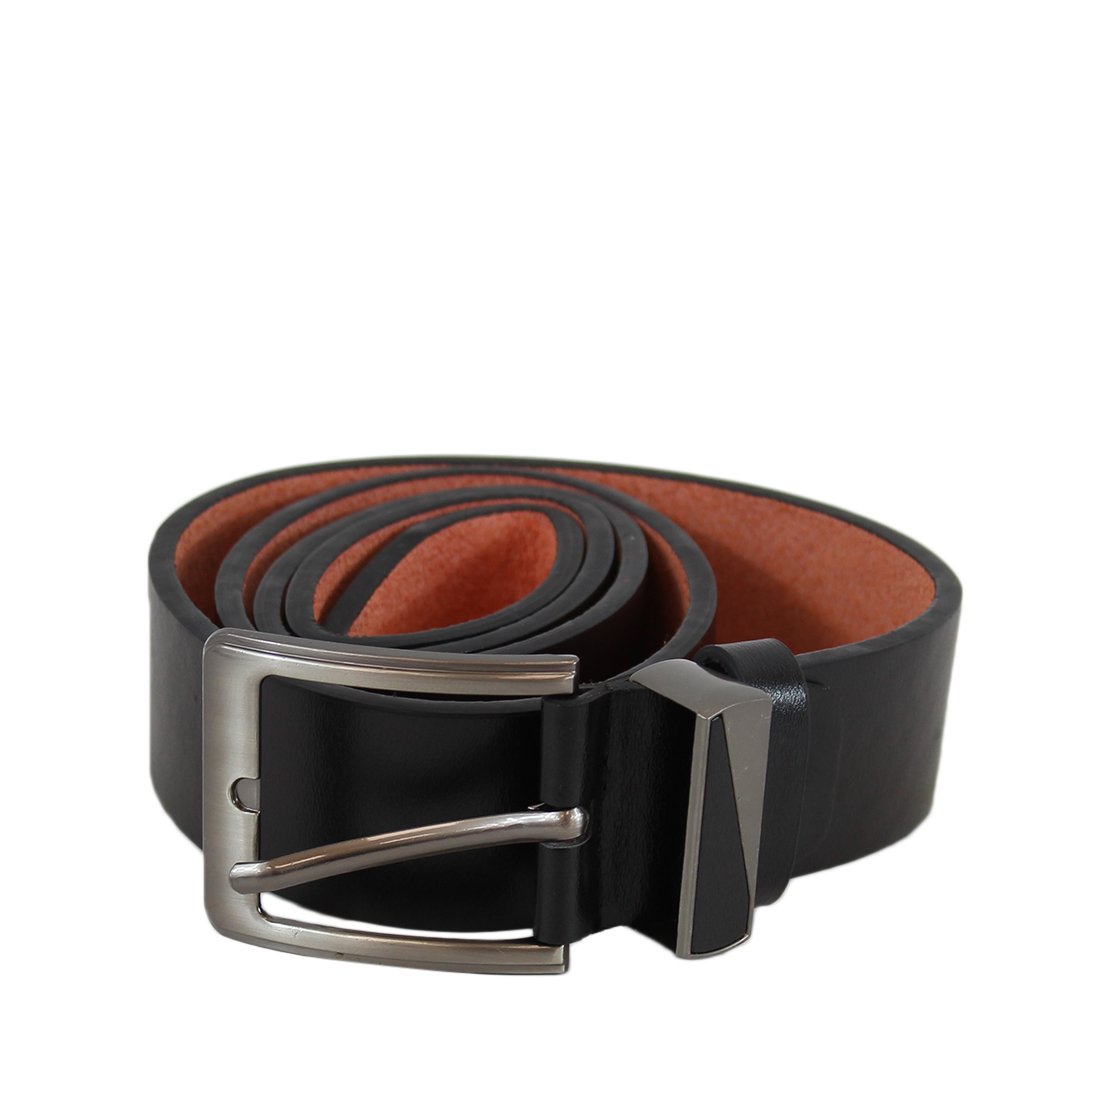 Plain wide leather belt with silver buckle